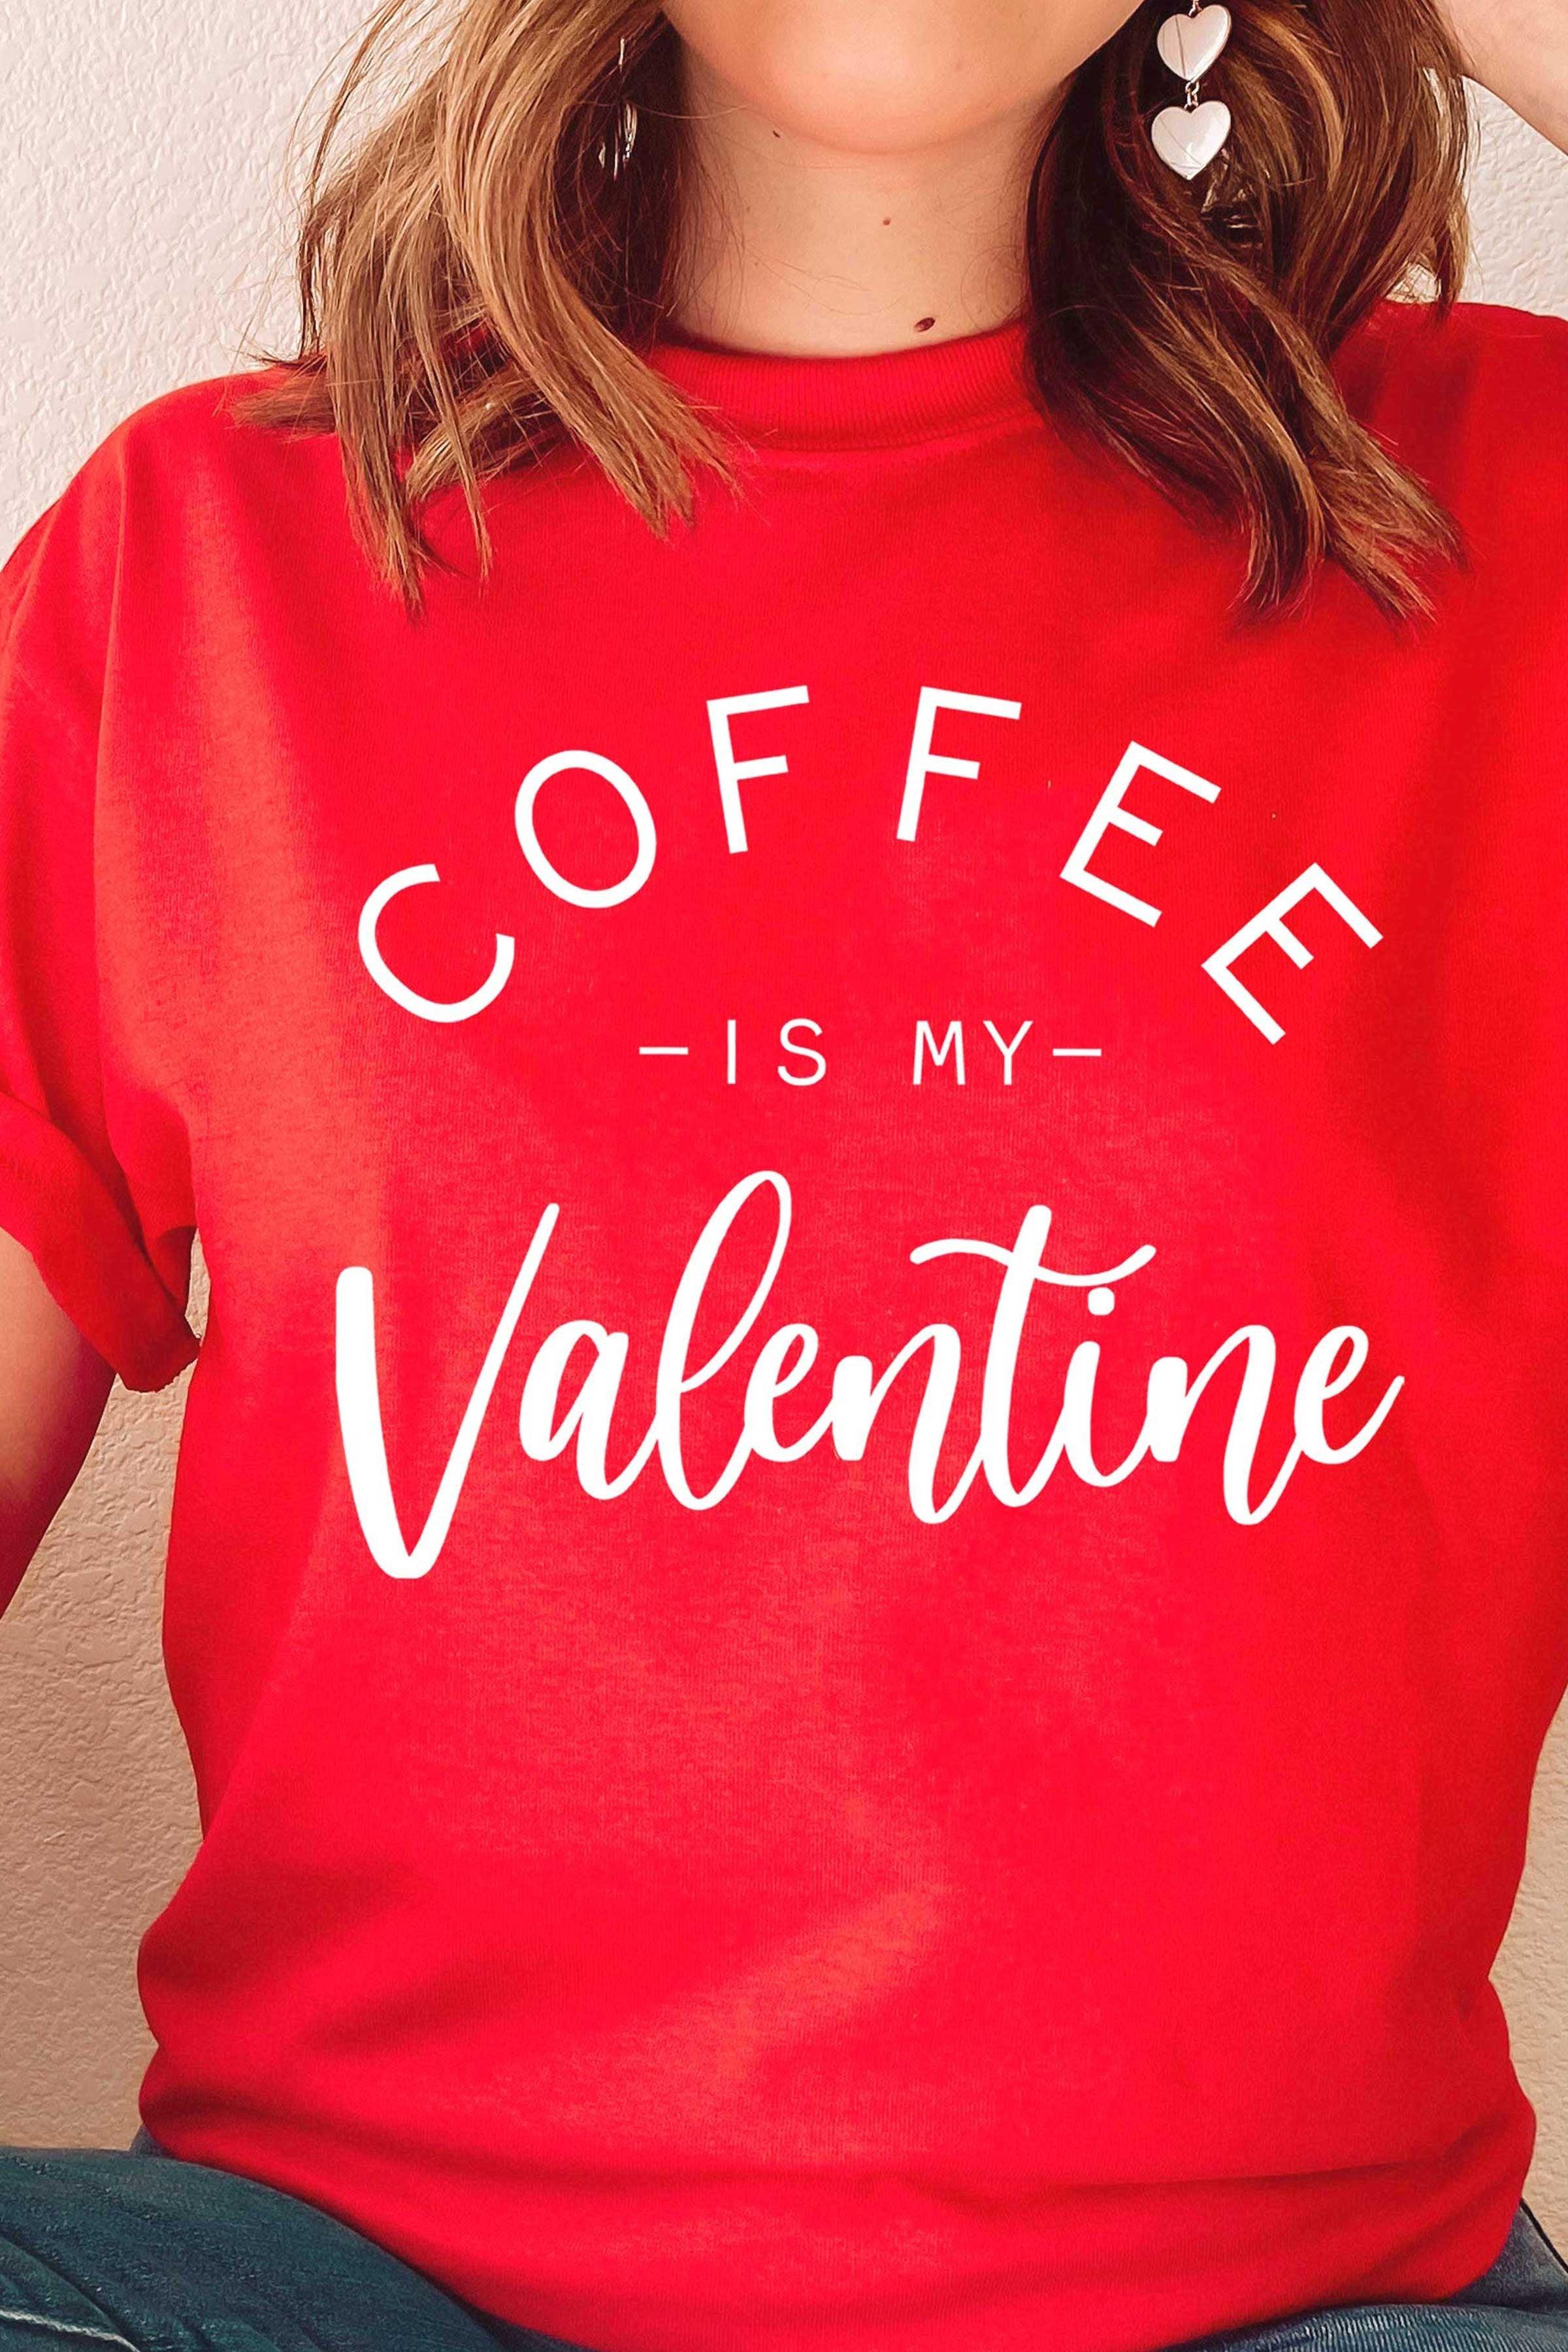 "Coffee is my Valentine" Tee - Mint Leafe Boutique 